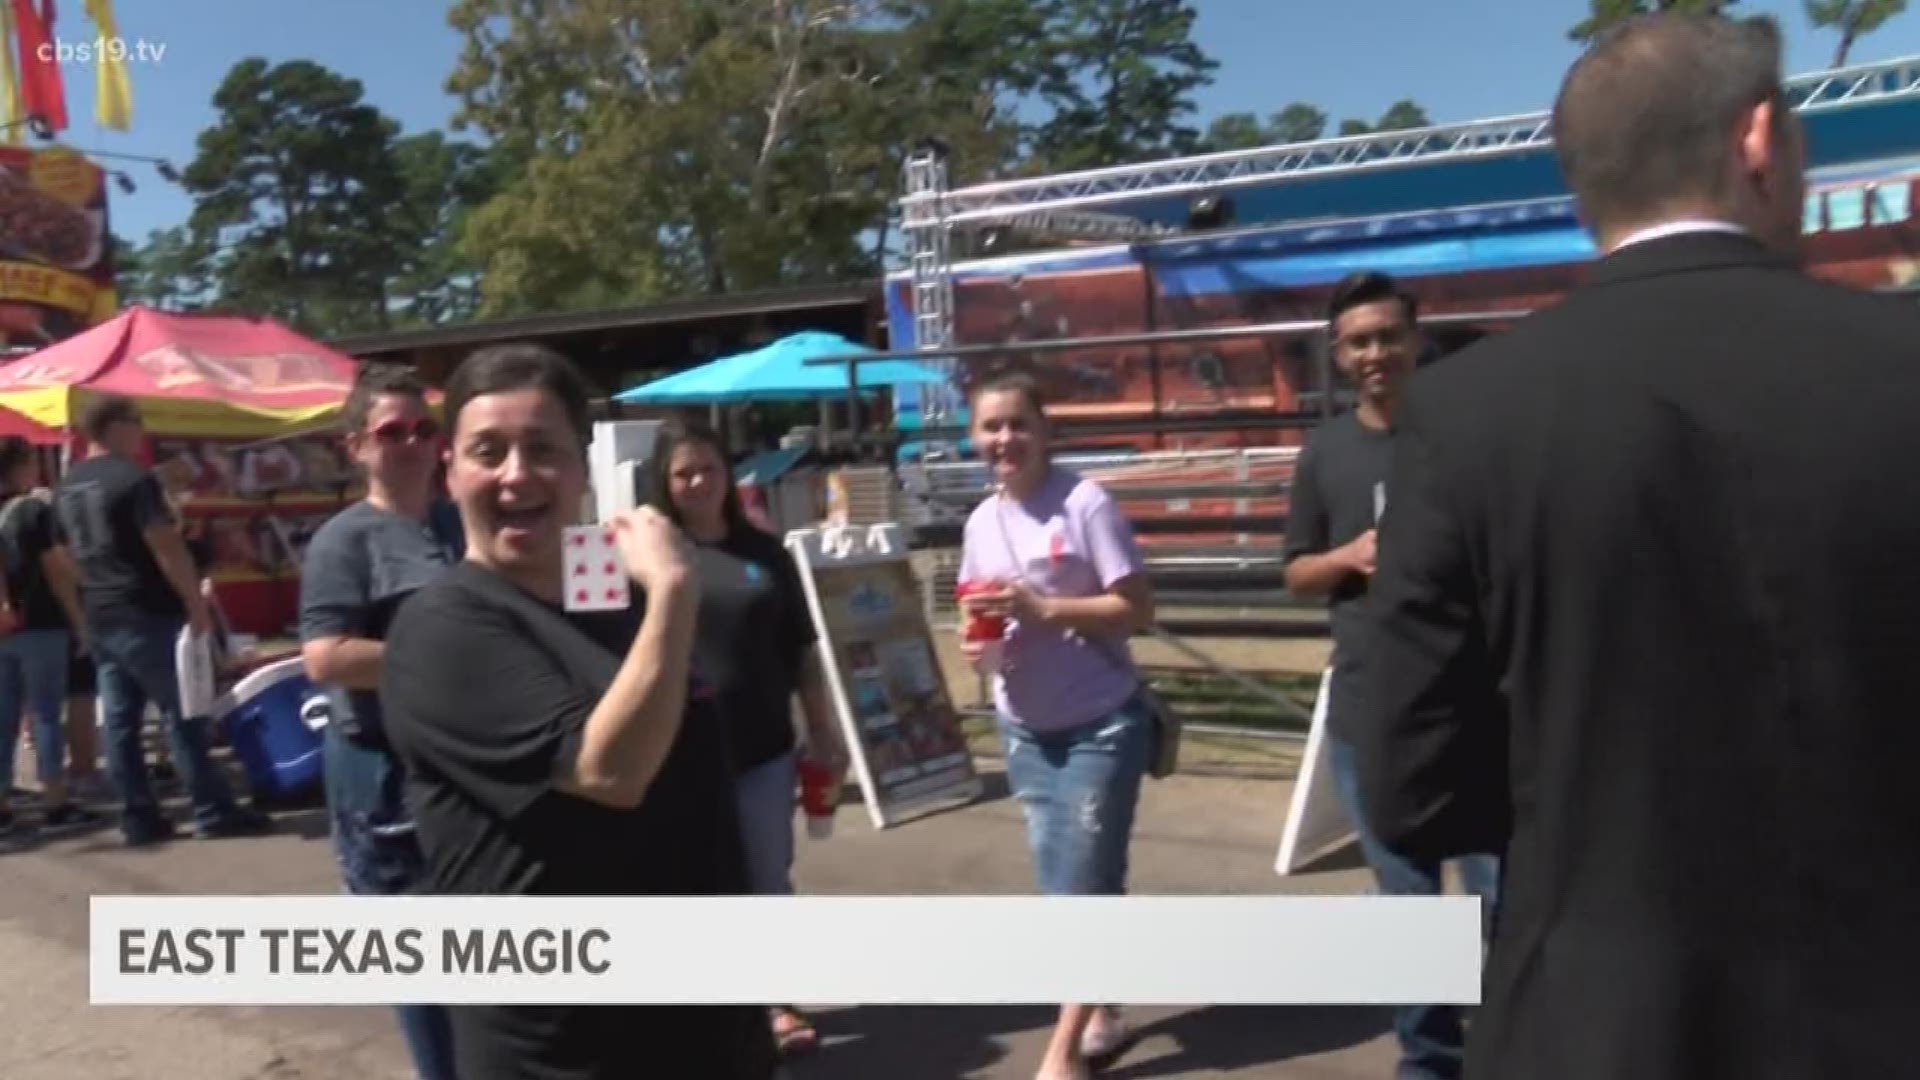 Kardenni the Magician showing off his tricks to East Texans enjoying the East Texas State Fair! Check out just a small sample of his abilities!